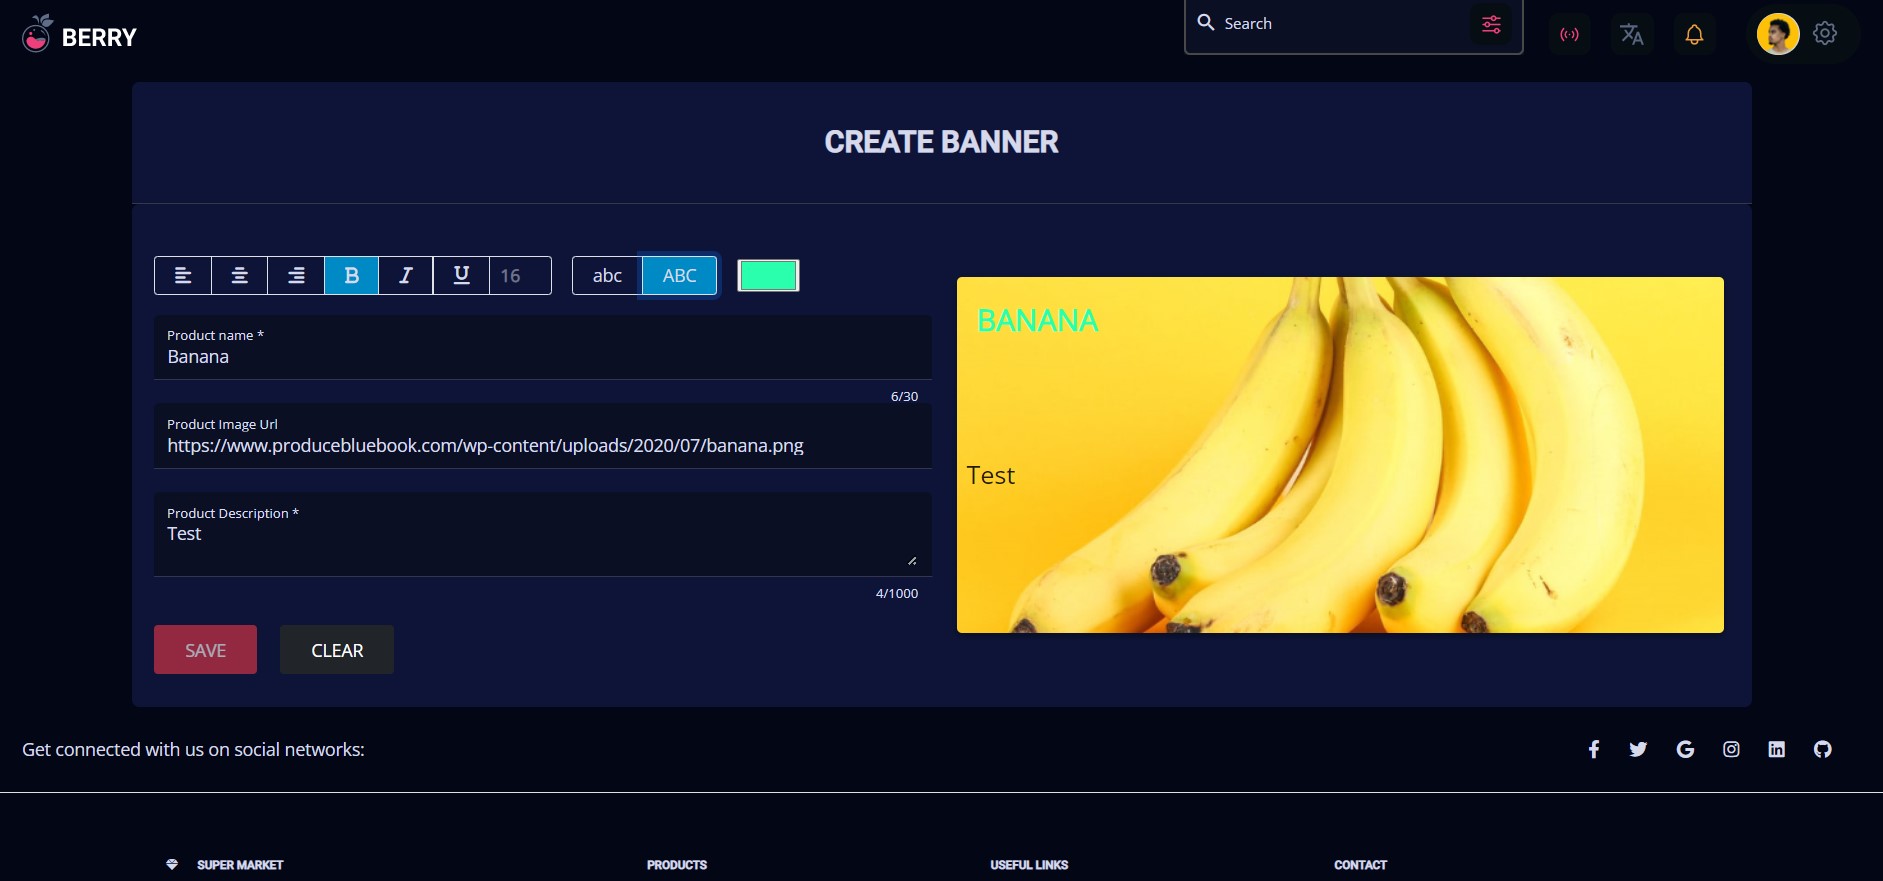 Create Banner page